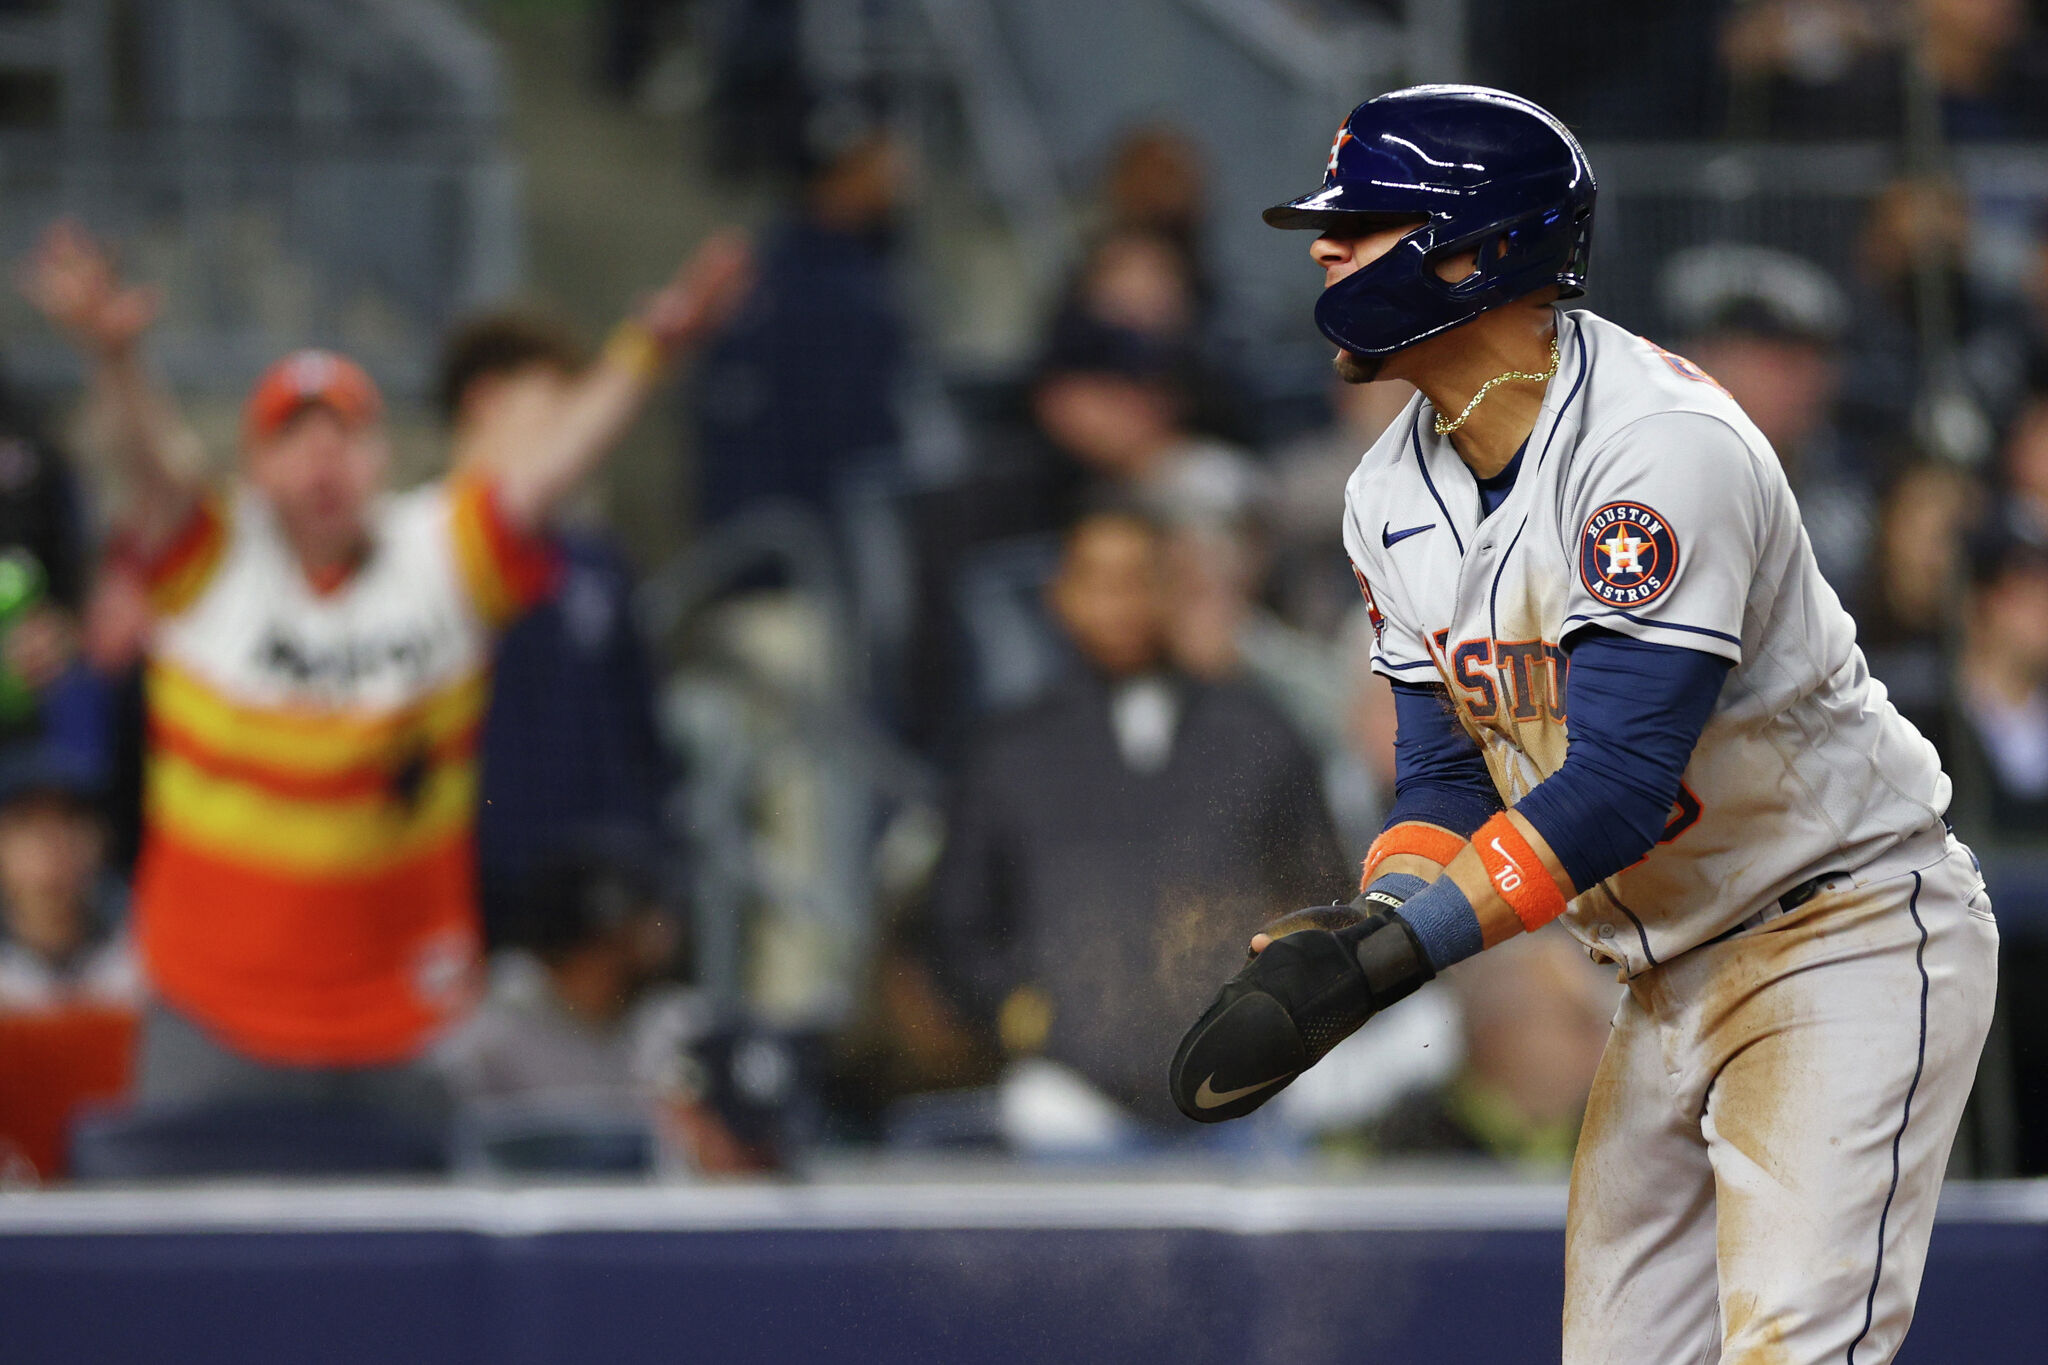 How the Astros Beat the Yankees in Game 4 of the A.L.C.S. - The